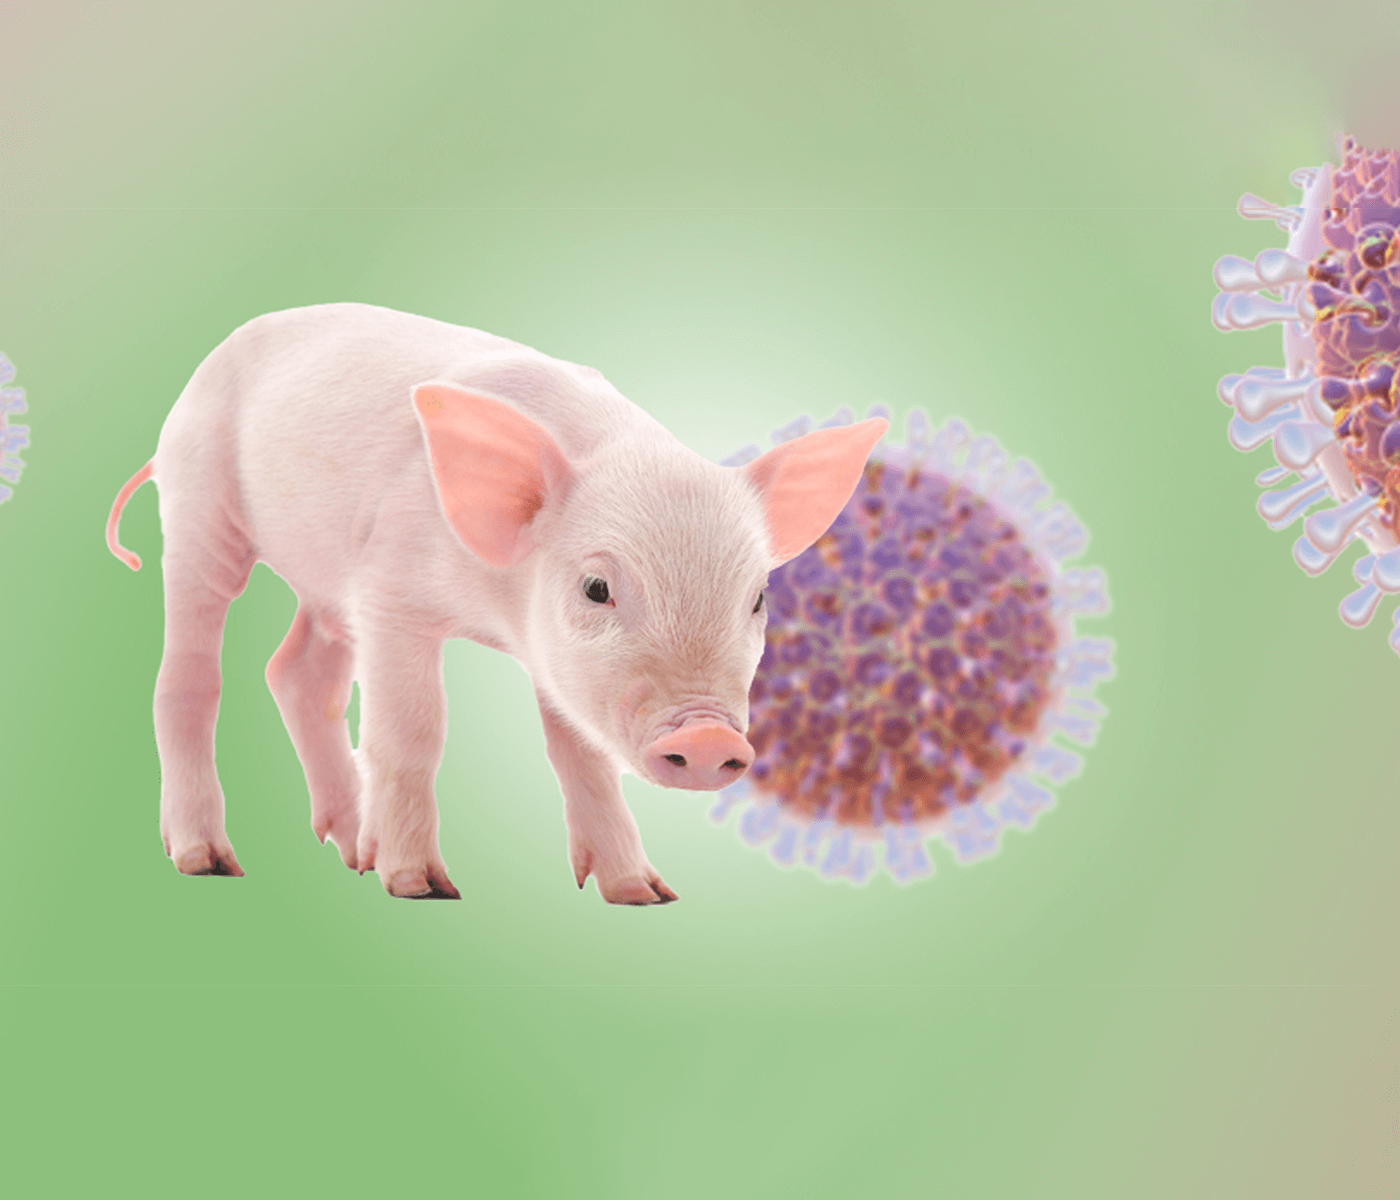 Porcine rotaviruses: epidemiology, pathogenesis, clinical signs, diagnosis and disease control